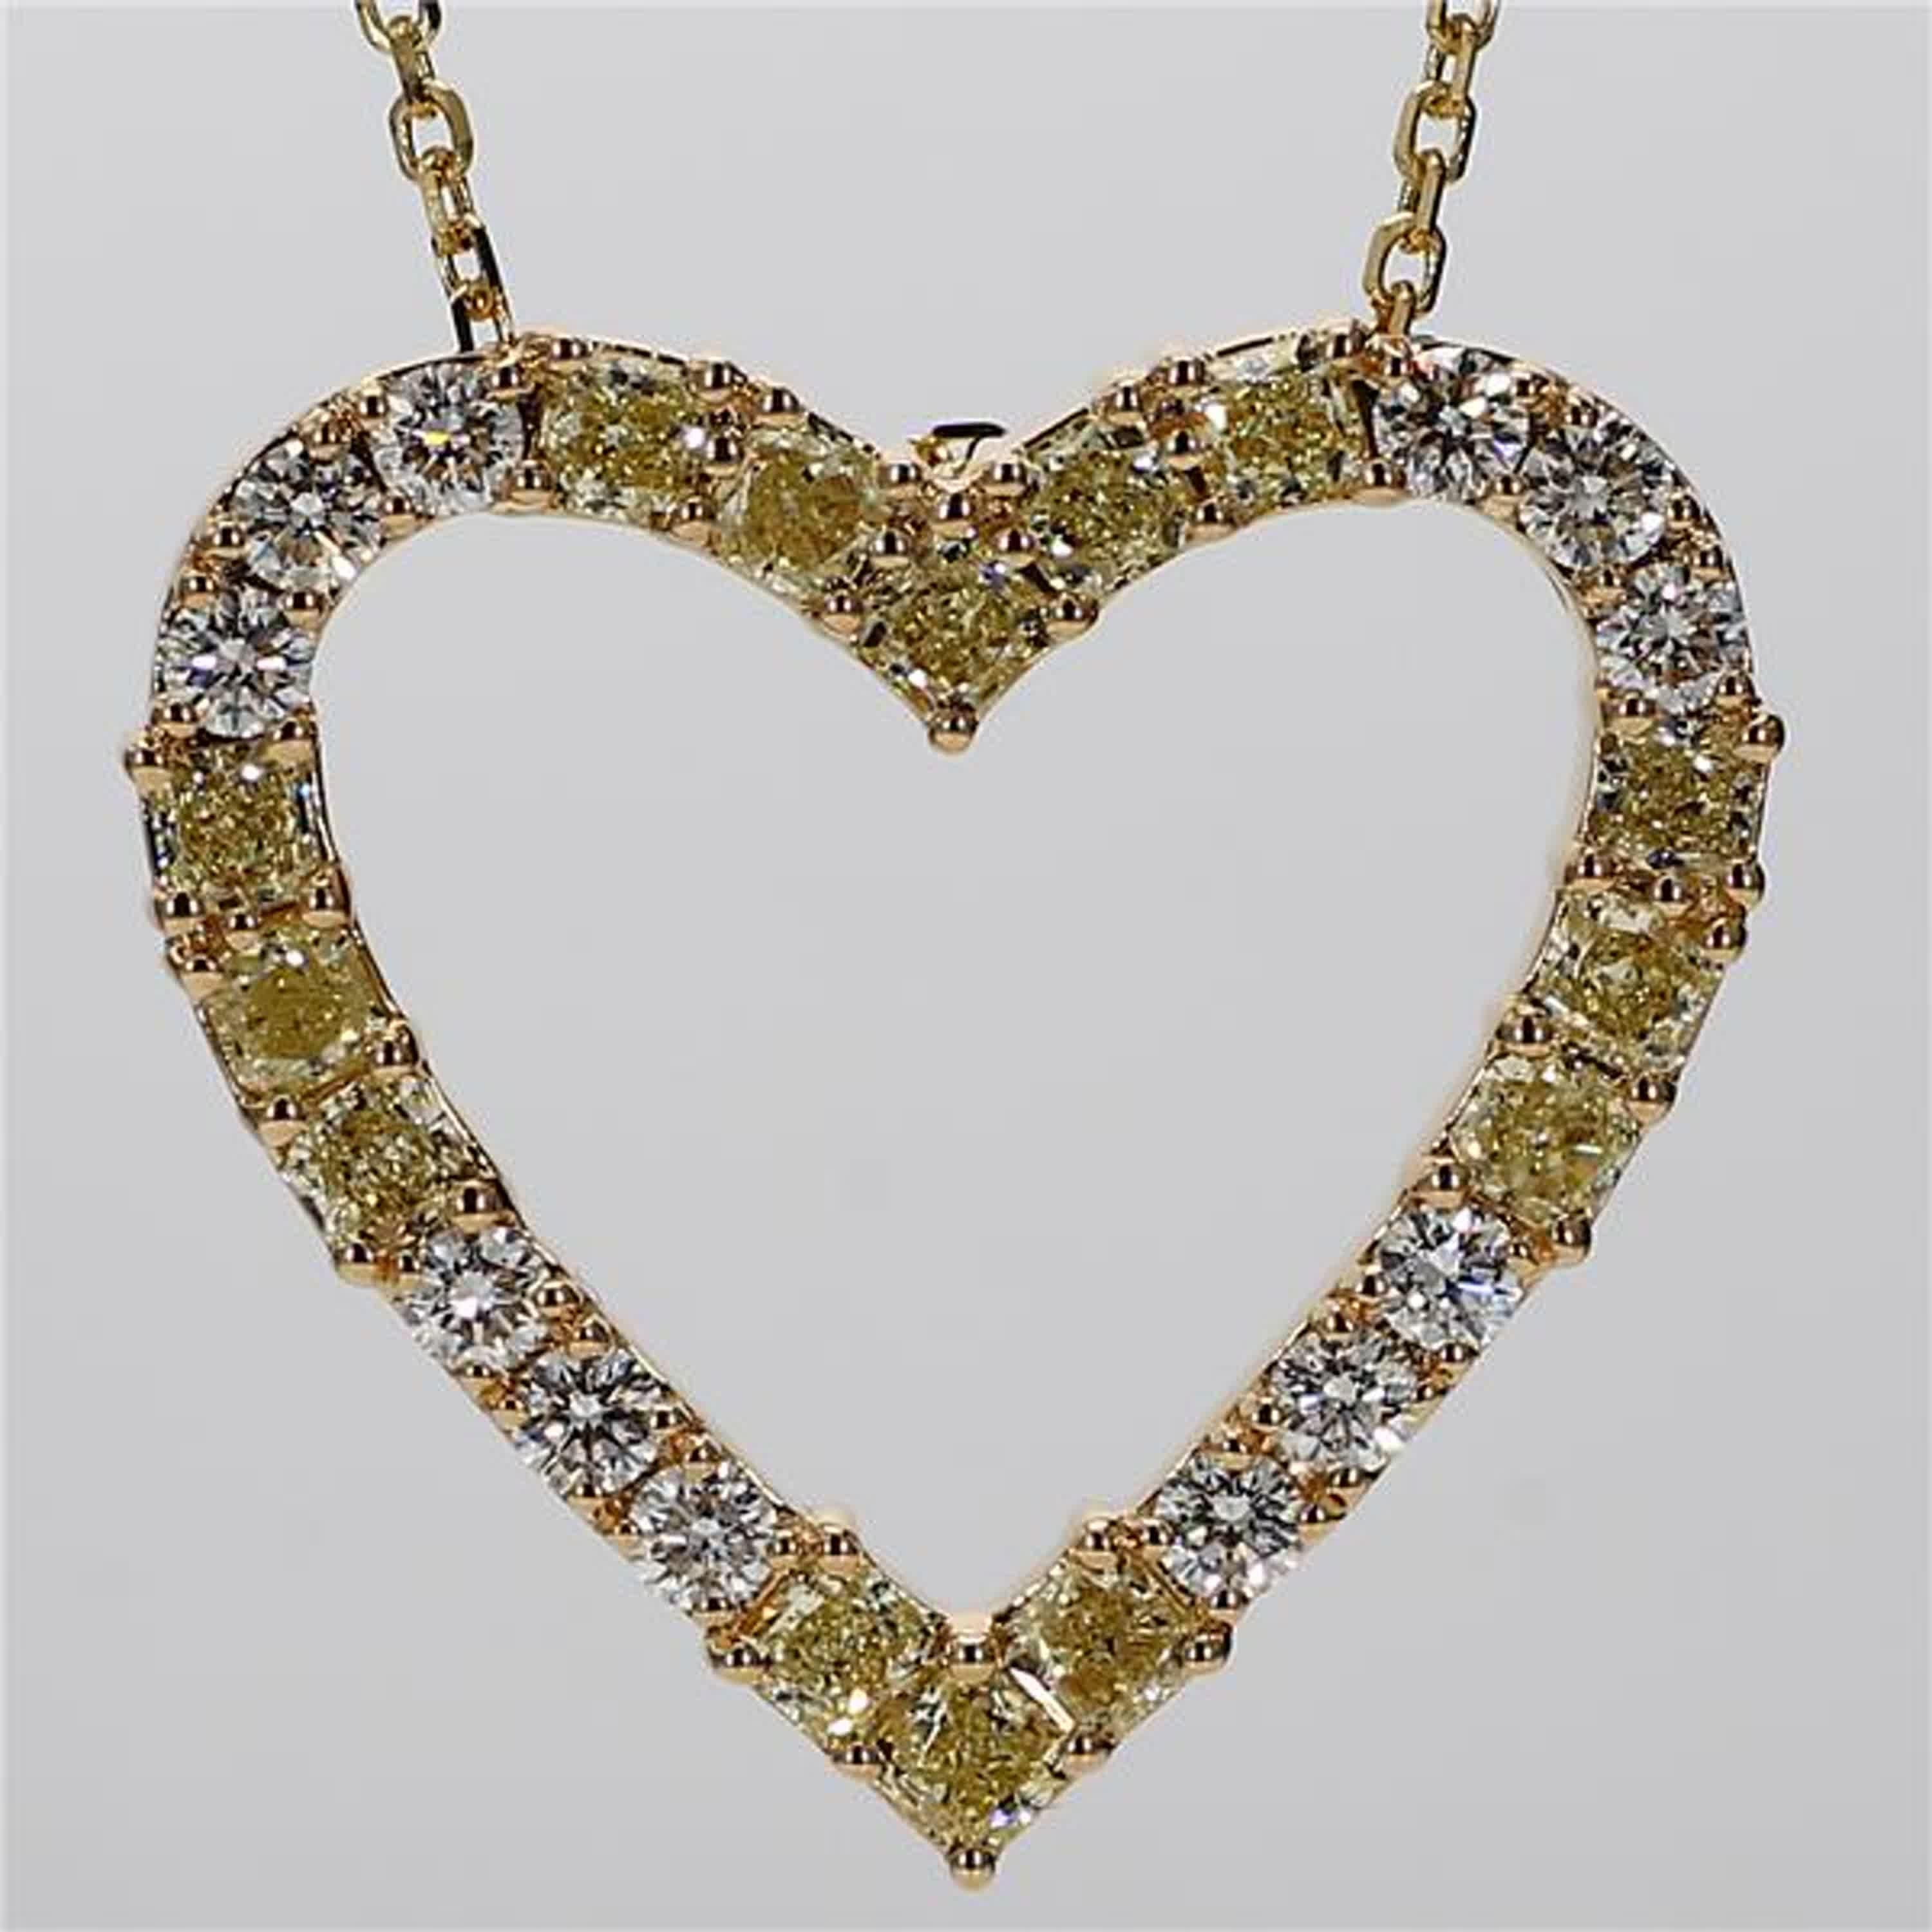 RareGemWorld's intriguing diamond necklace. Mounted in a beautiful 18K Yellow and White Gold setting with natural radiant cut yellow diamonds. The yellow diamonds are complimented by small round natural white diamond melee. This necklace is